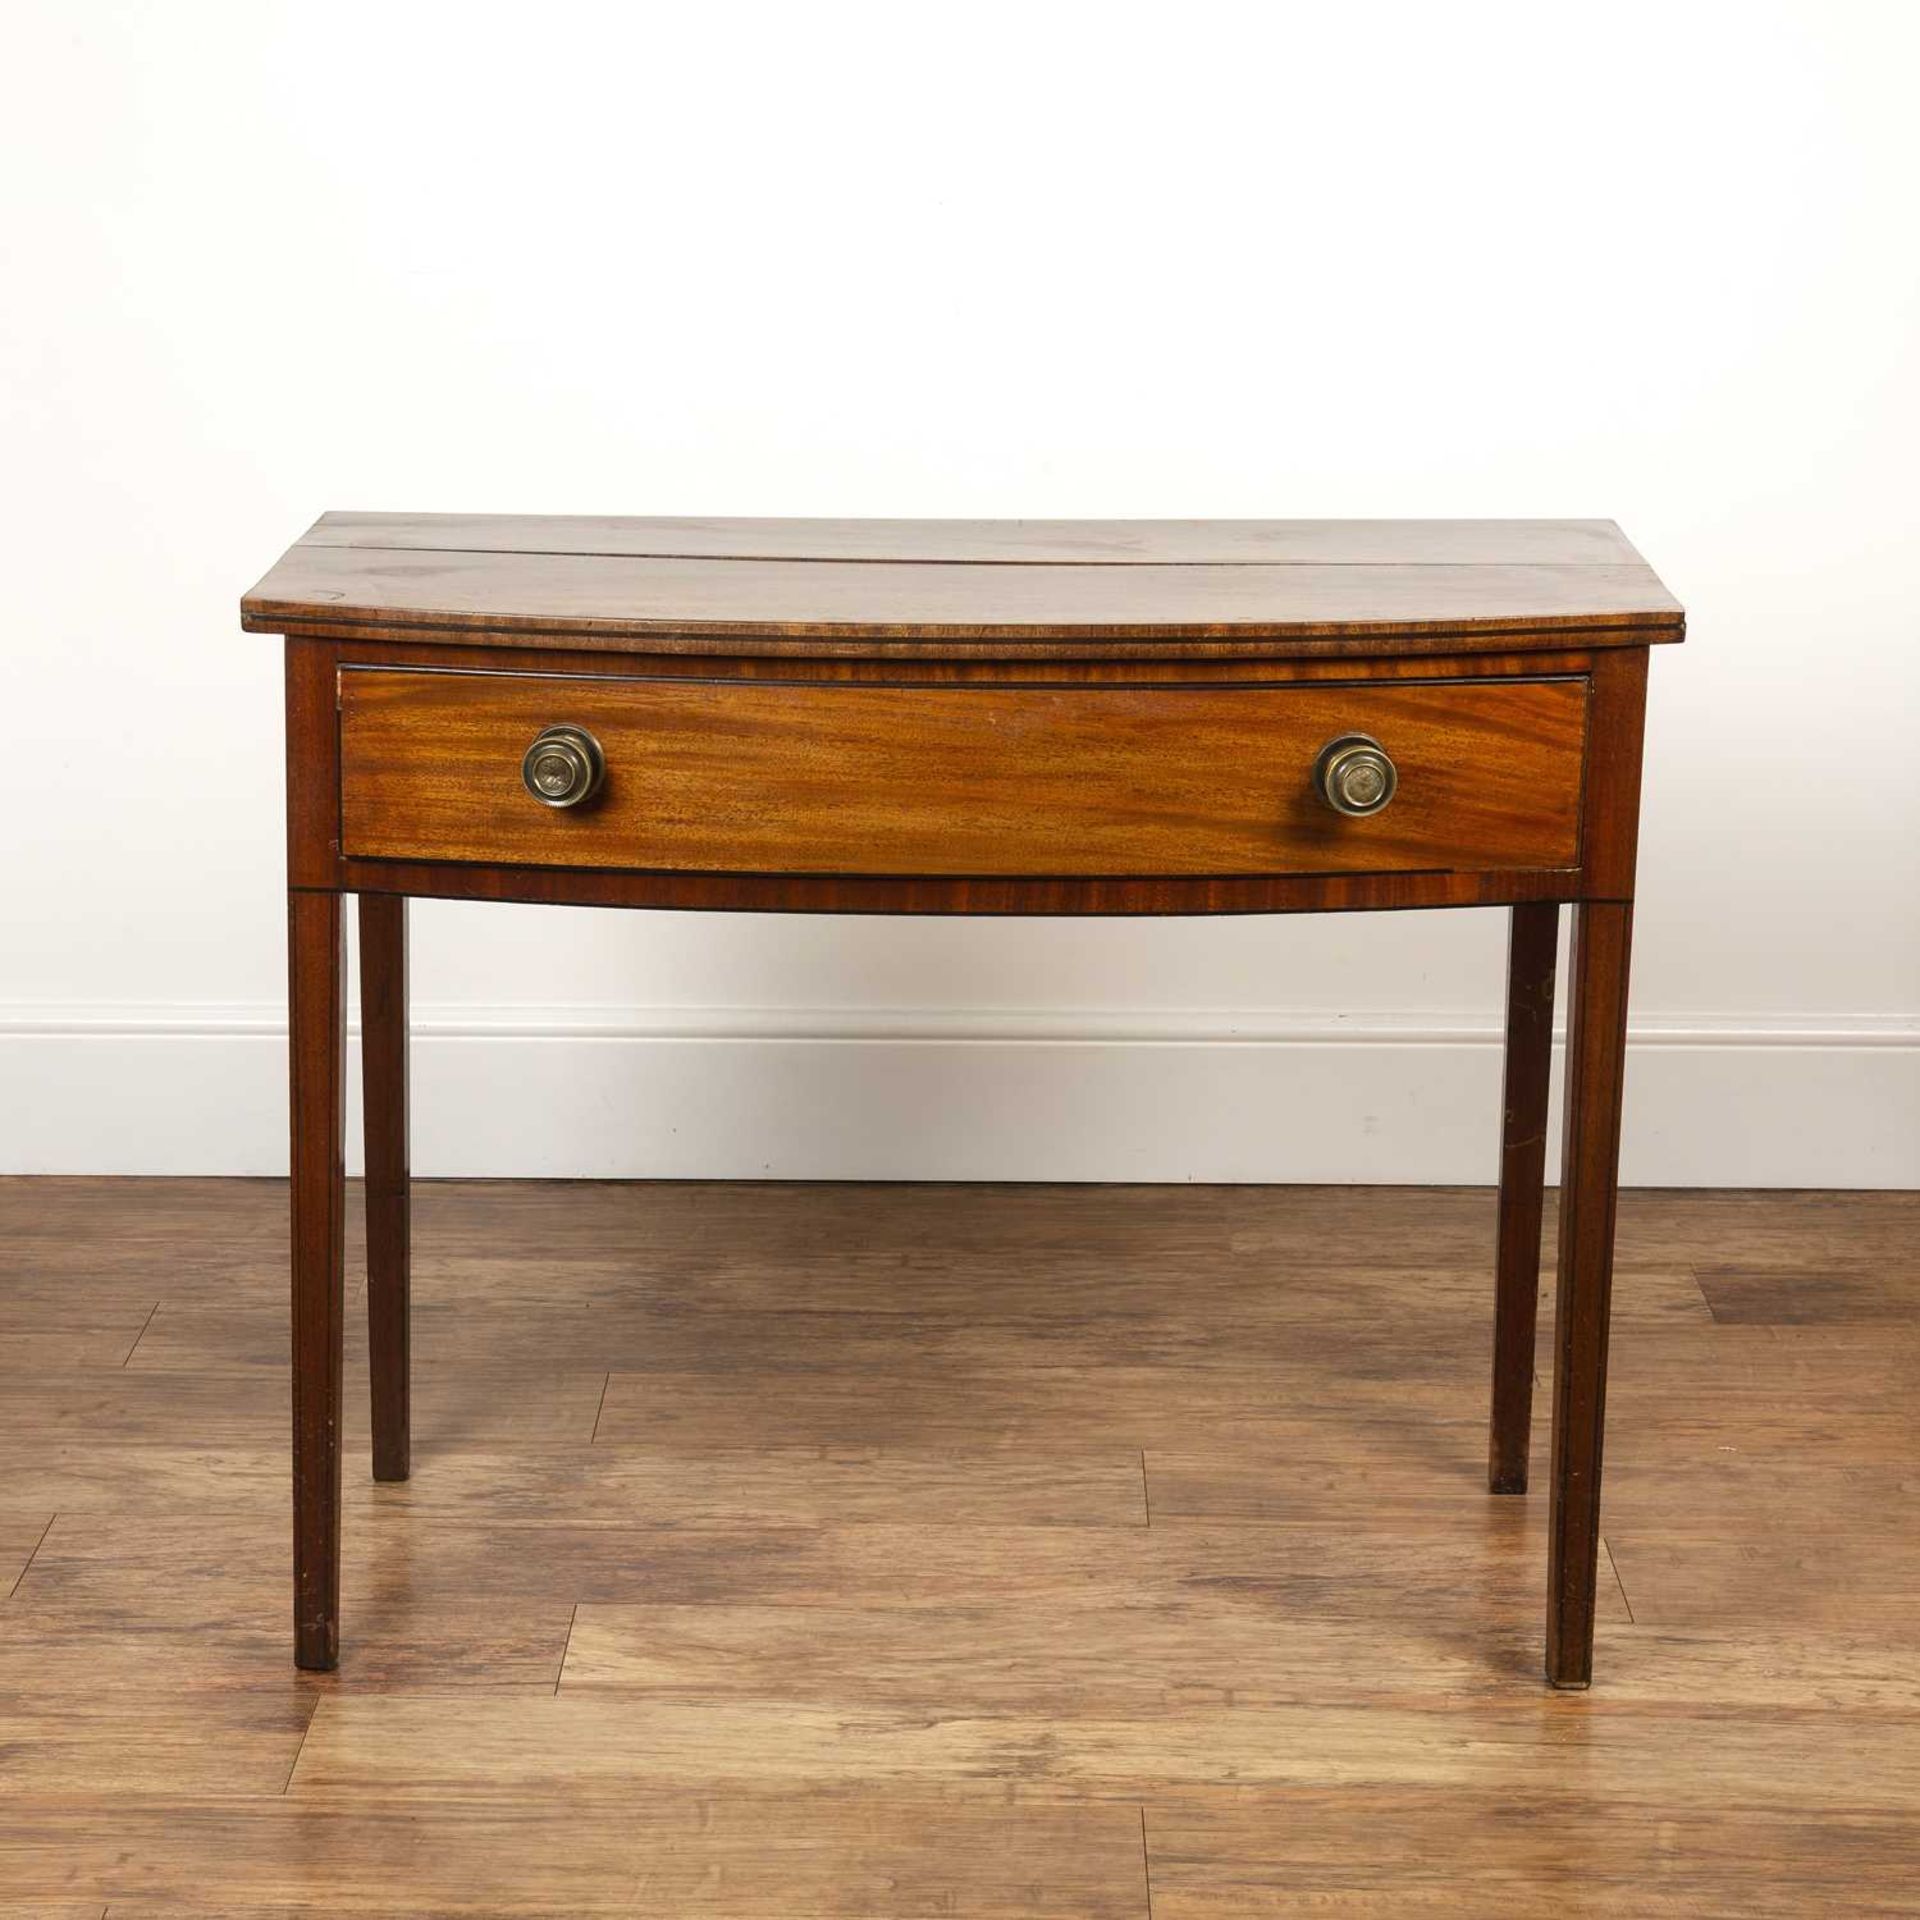 Mahogany bow fronted side table with single frieze drawer and brass handles, standing on square